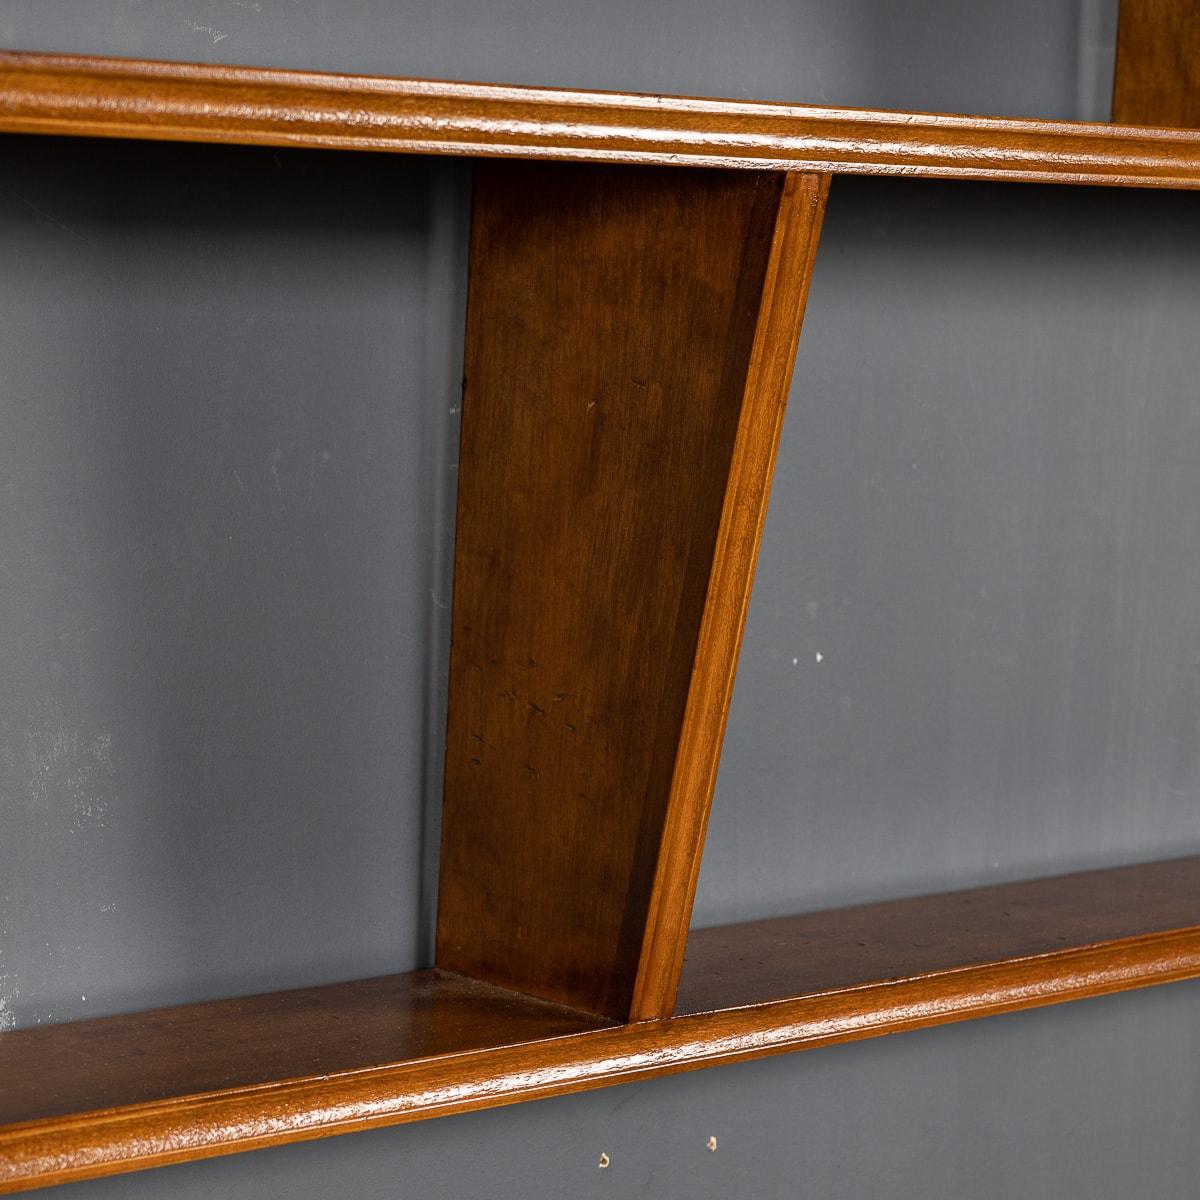 20th Century Italian Beech Wood Bookcase / Room Divider, c.1950 For Sale 9